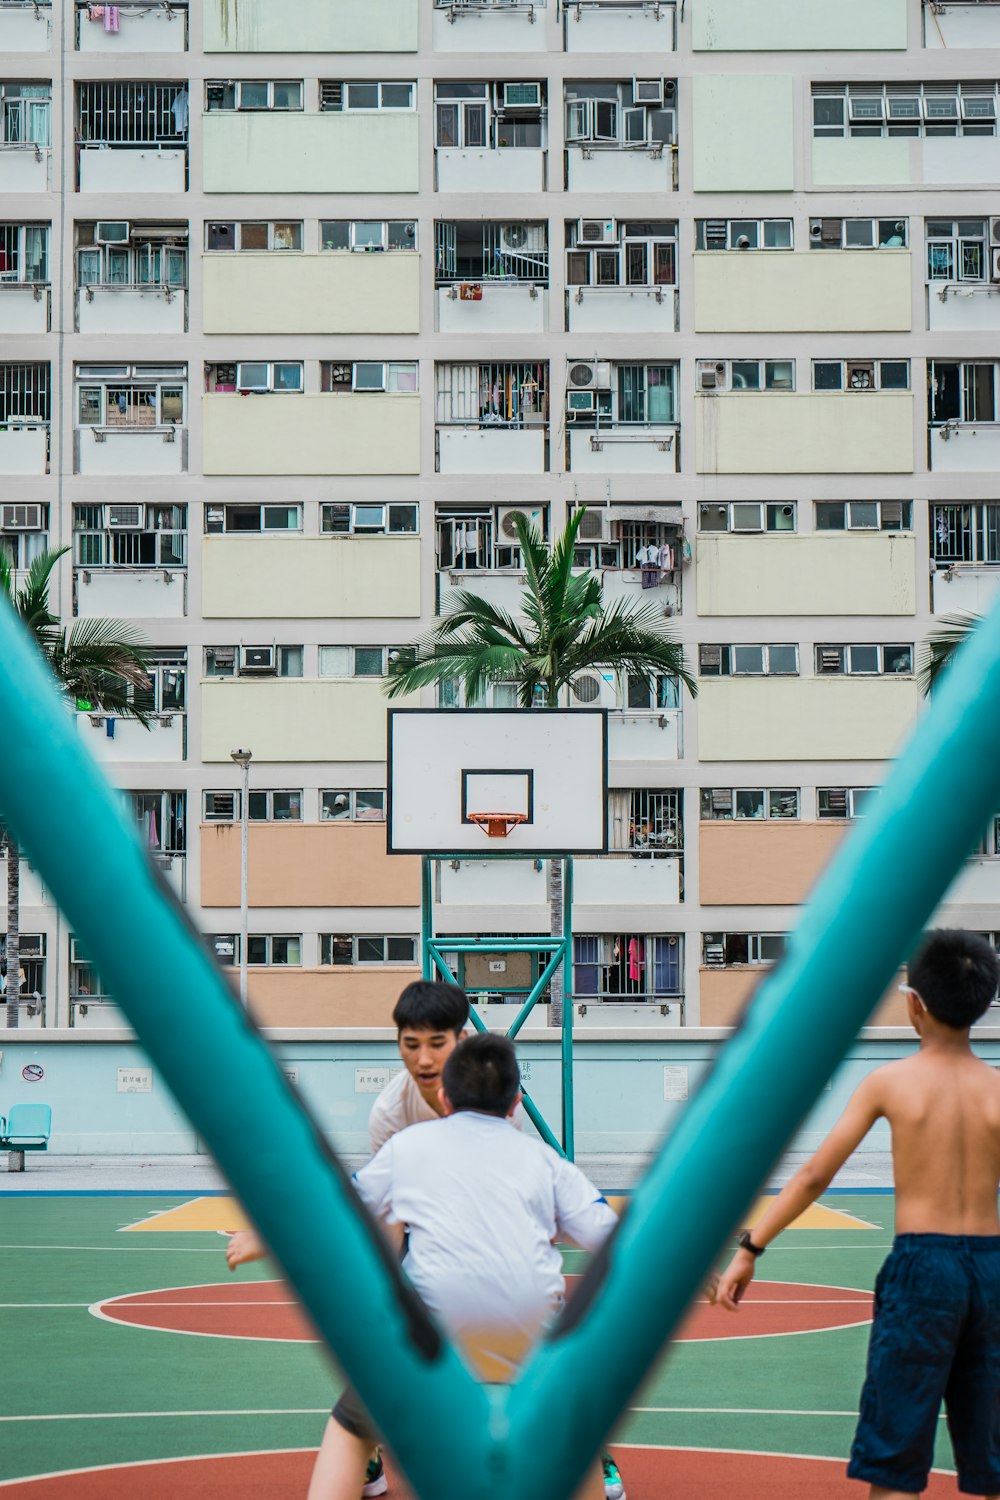 group of people playing basketball during daytime